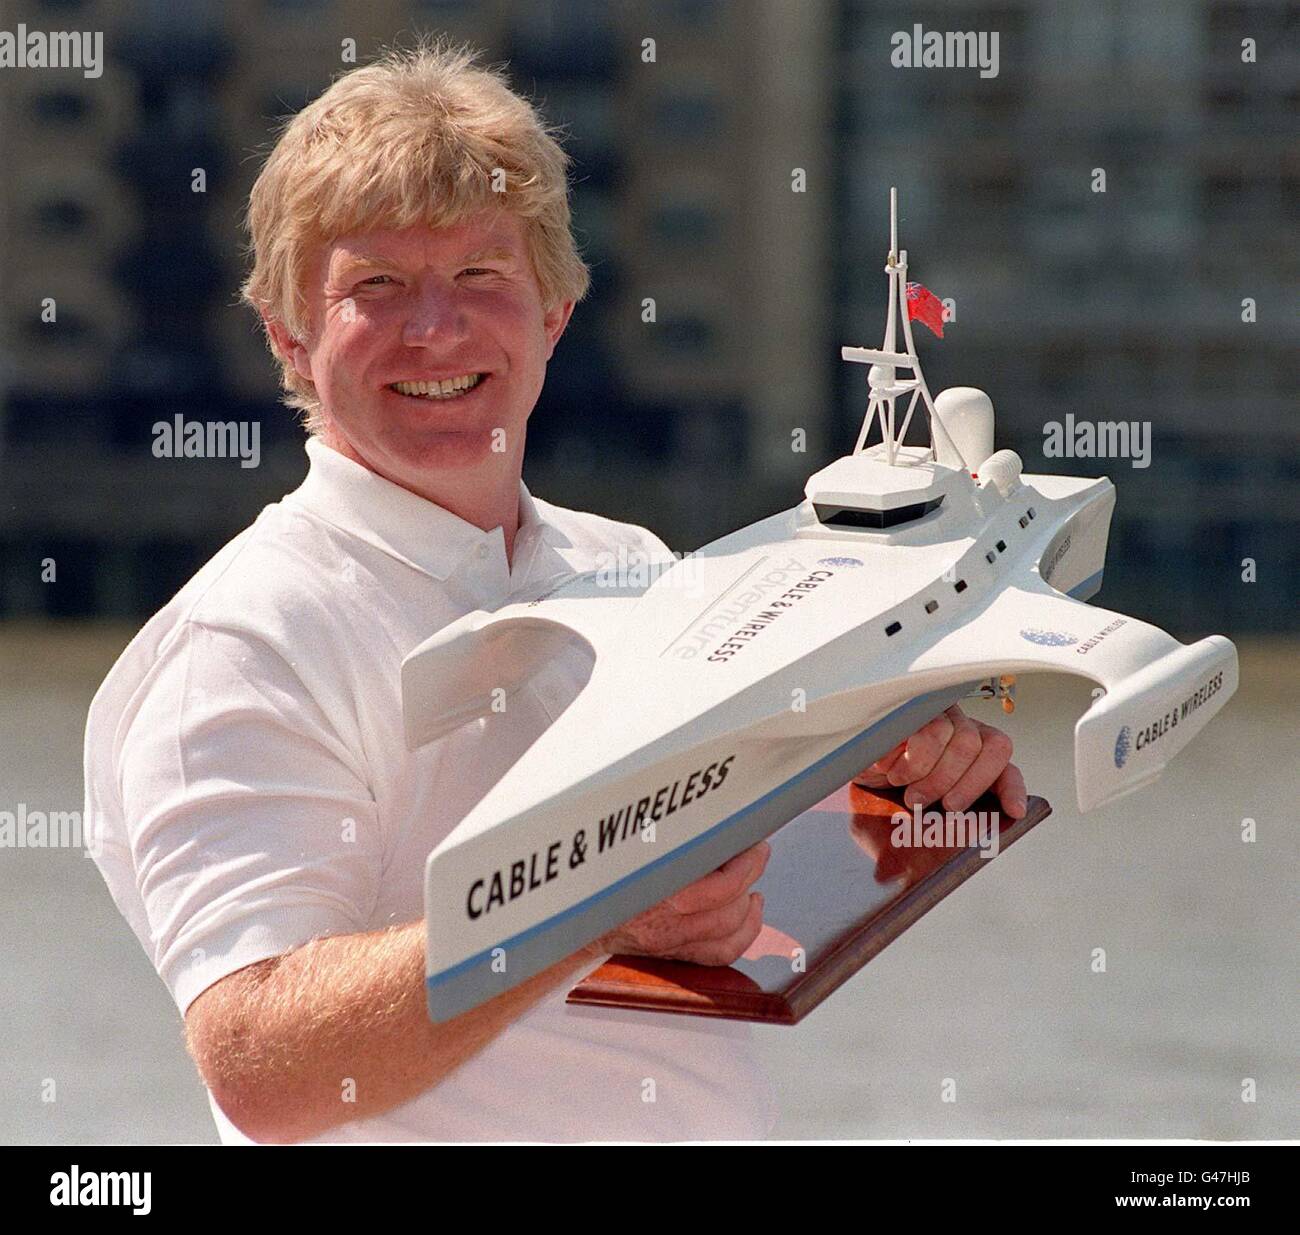 Skipper and leader of the Cable & Wireless Adventure Jock Wishart holds a model of the Cable & Wireless, the 115-foot multi-hull powered vessel which will attempt to go around the world in 80 days in 1998. Mr Wishart who will captain the Cable and Wireless on its pioneering 26,000-mile worldwide journey is offering 16 people to join his professional crew of four. Photo by Sam Pearce/PA. Watch for PA Story. Stock Photo